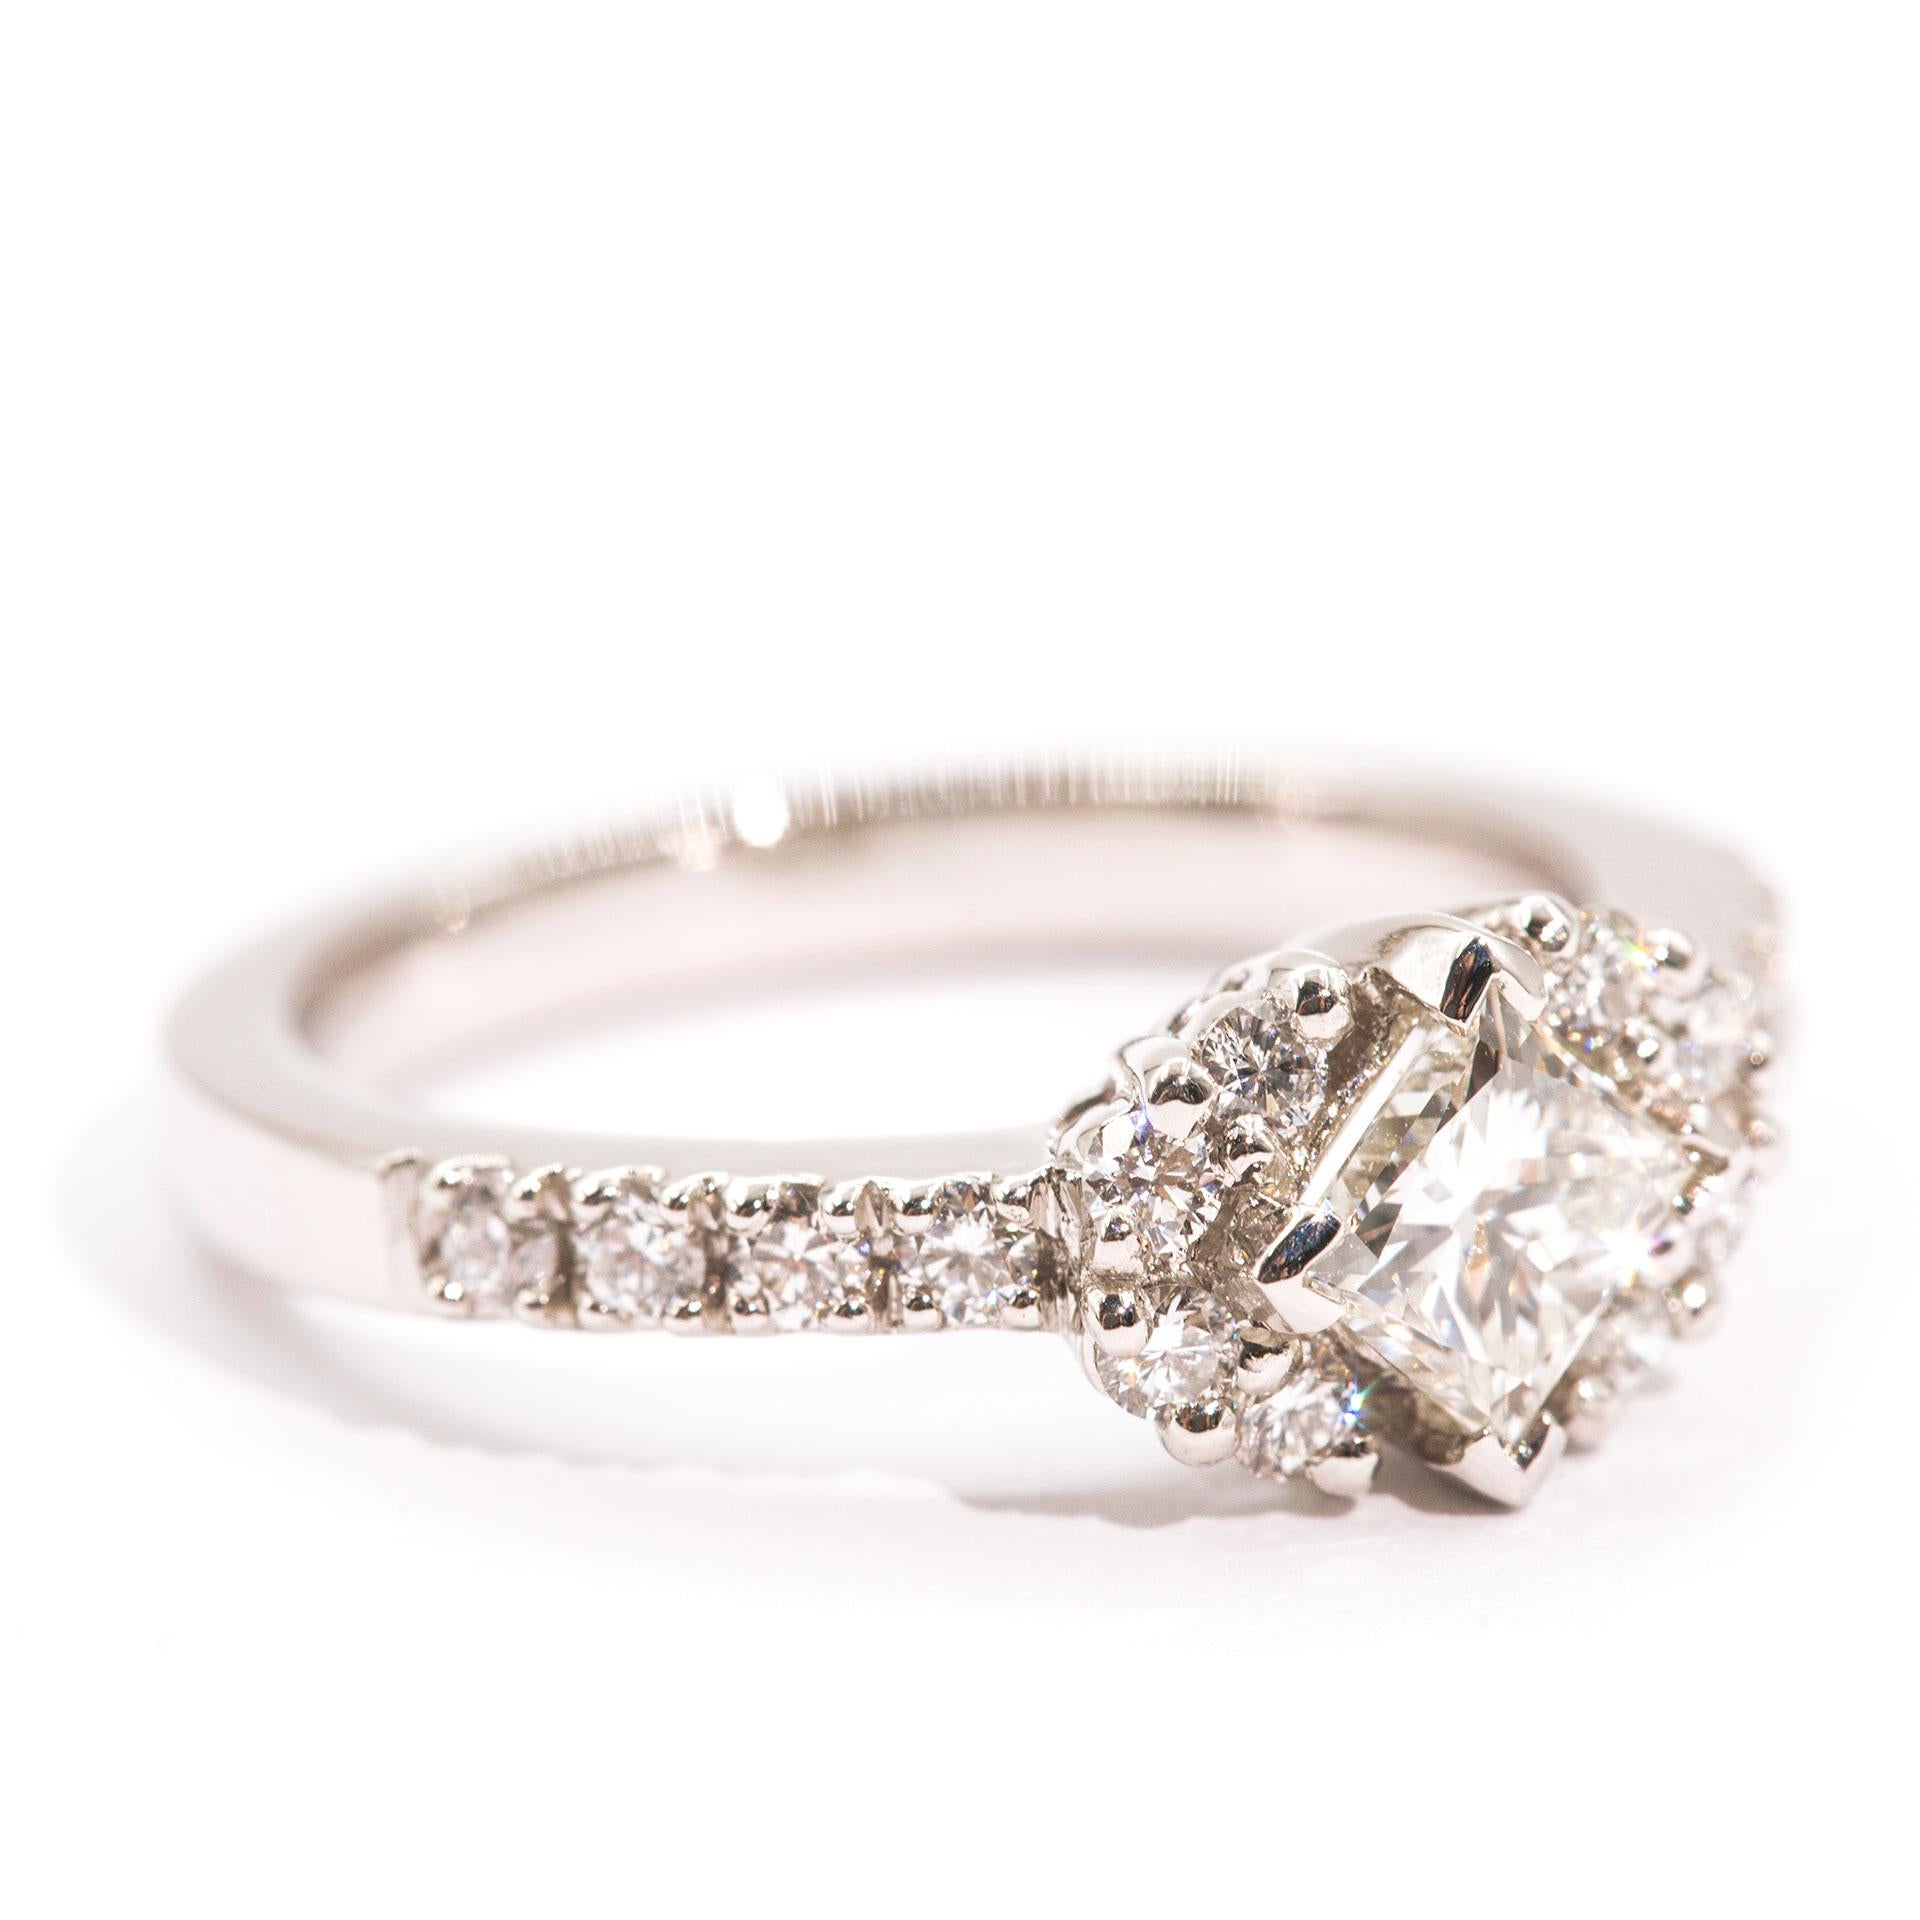 Forged in platinum is this uniquely designed modern engagement ring that features a stunning 0.63 carat certified princess cut diamond in the centre. The princess cut diamond is complimented by carefully set round brilliant cut diamonds that total